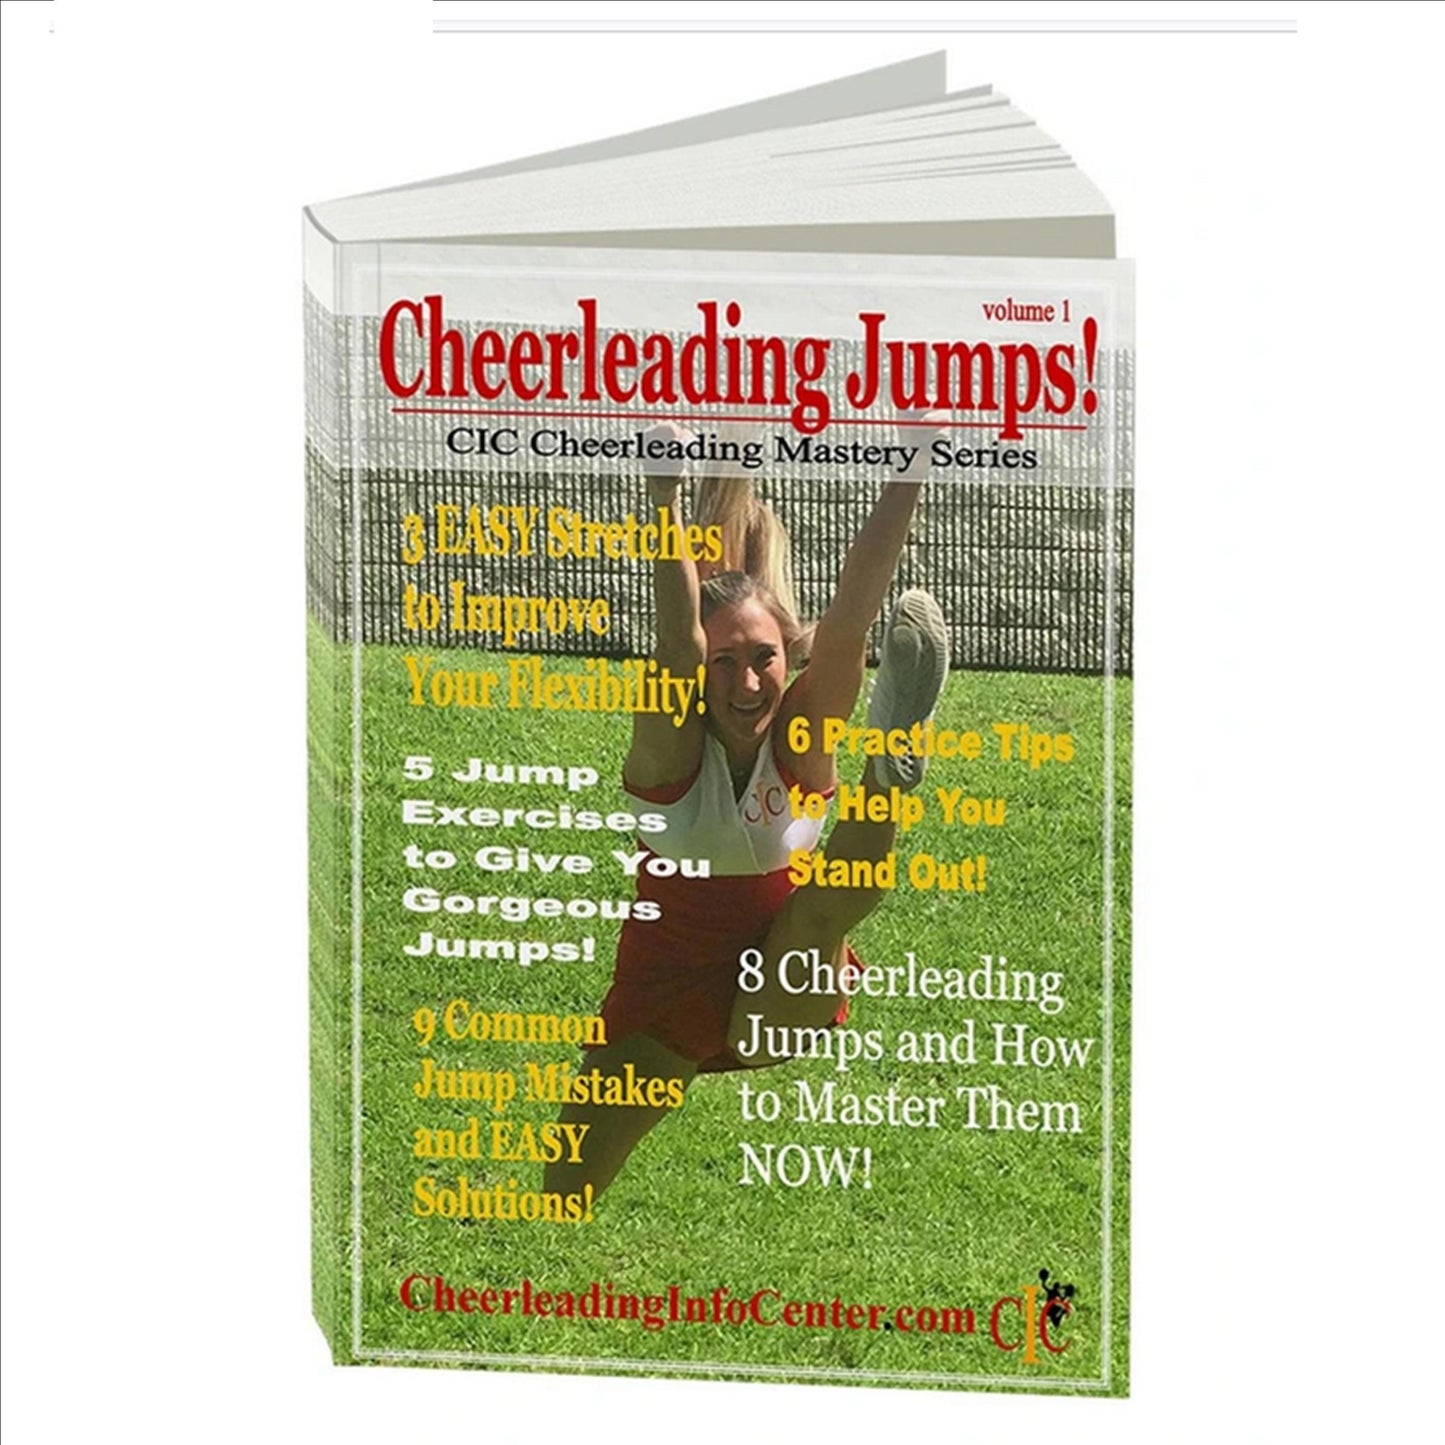 How to Do Cheerleading Jumps - Video Classes - Cheer and Dance On Demand